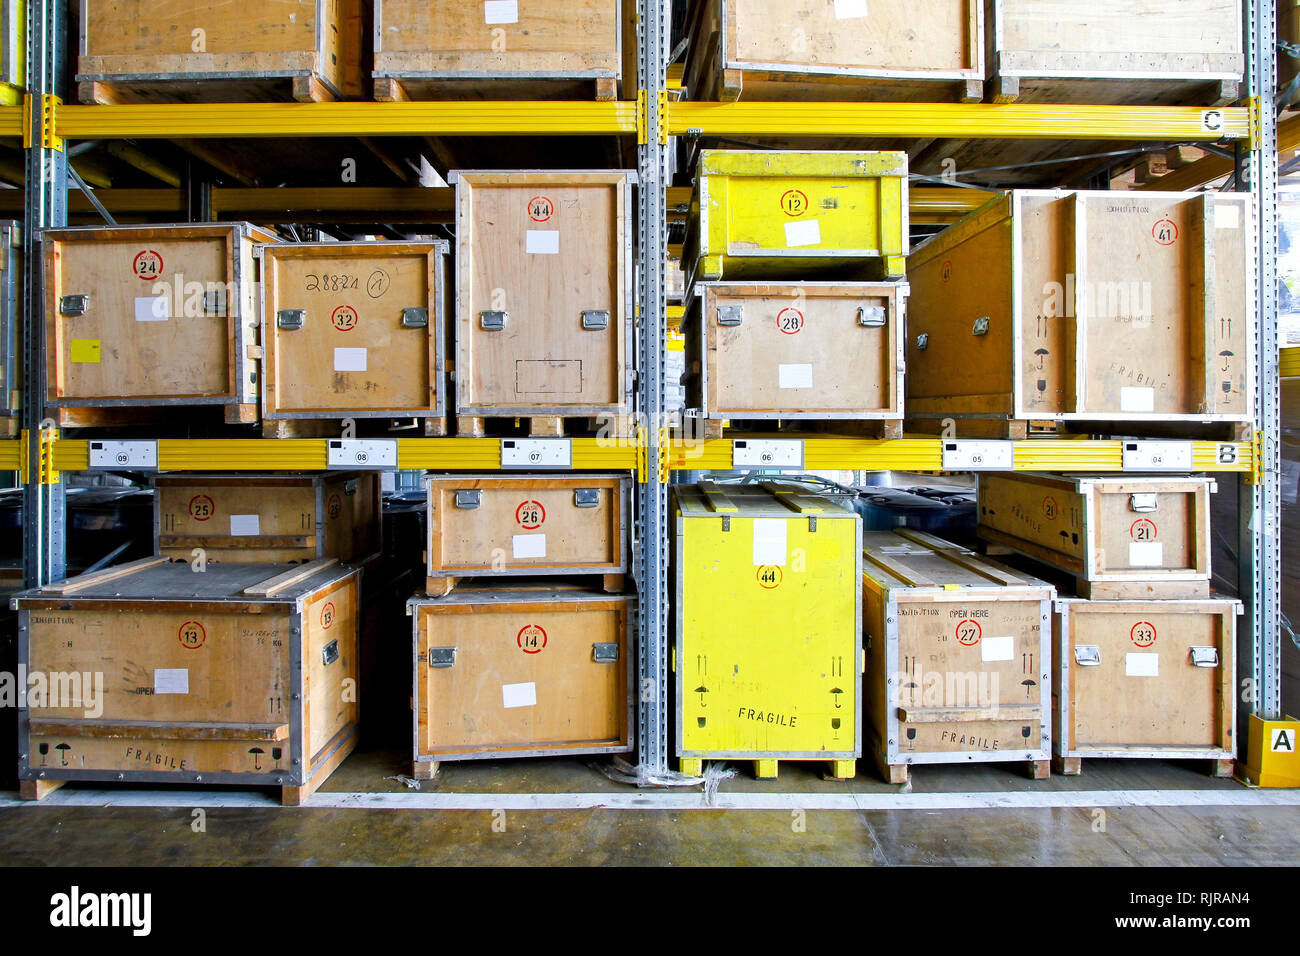 Wooden crates at shelves in museum warehouse Stock Photo